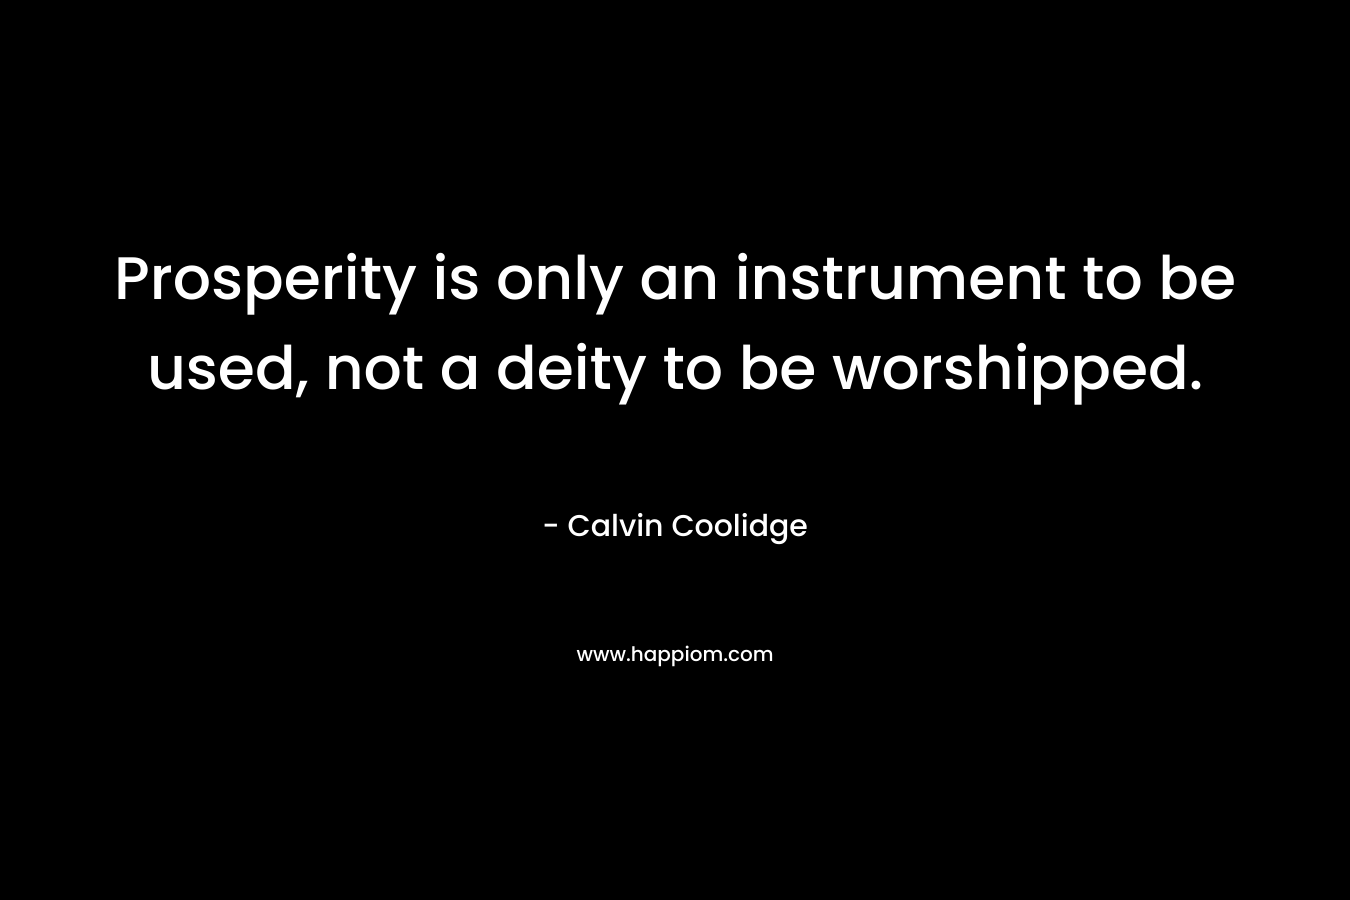 Prosperity is only an instrument to be used, not a deity to be worshipped. – Calvin Coolidge